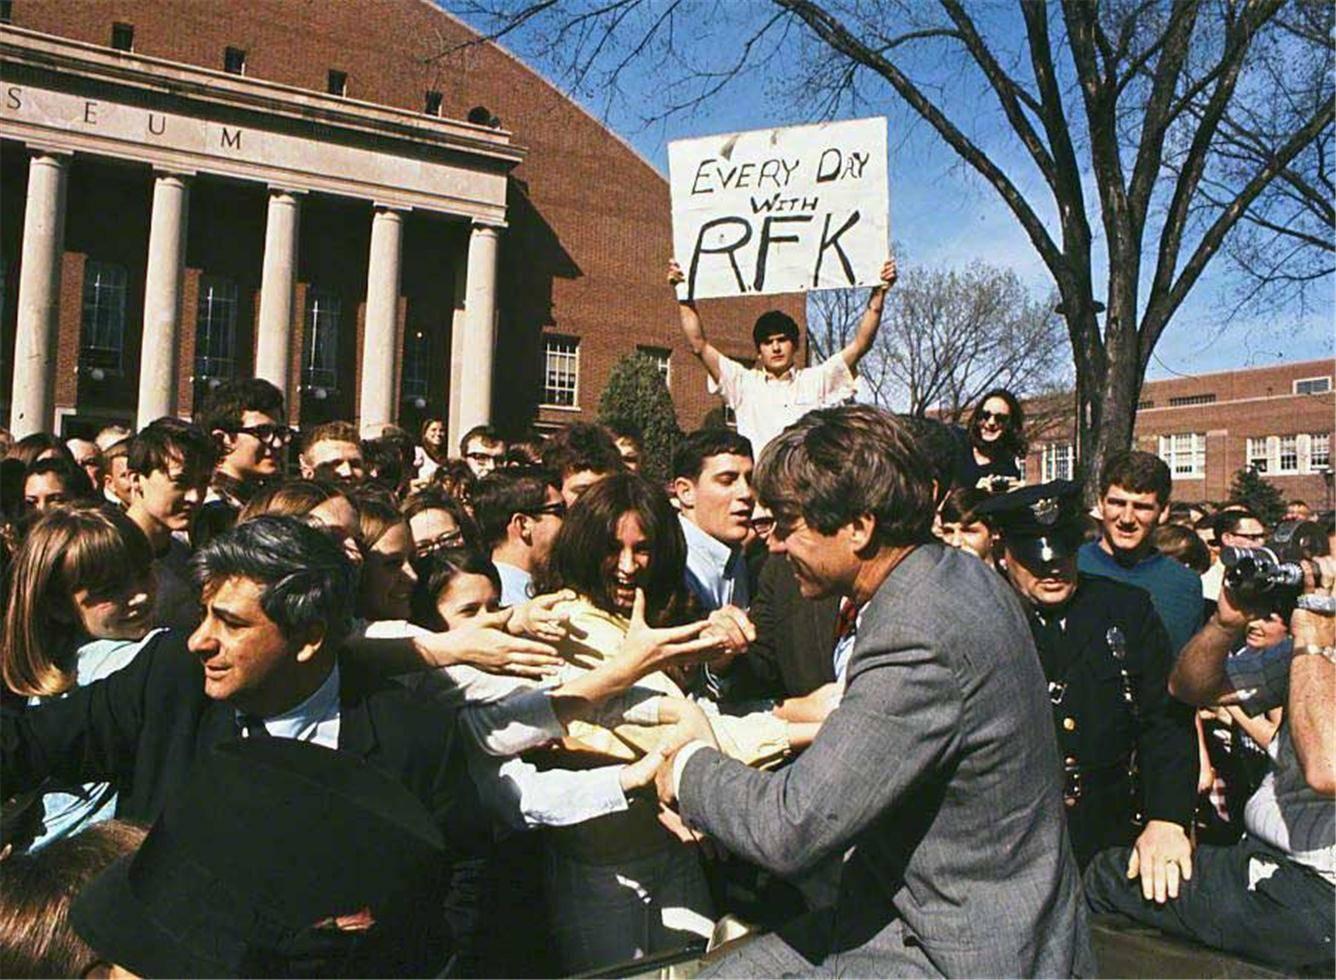 Art Shay Color Photograph - Every Day with RFK, 1968